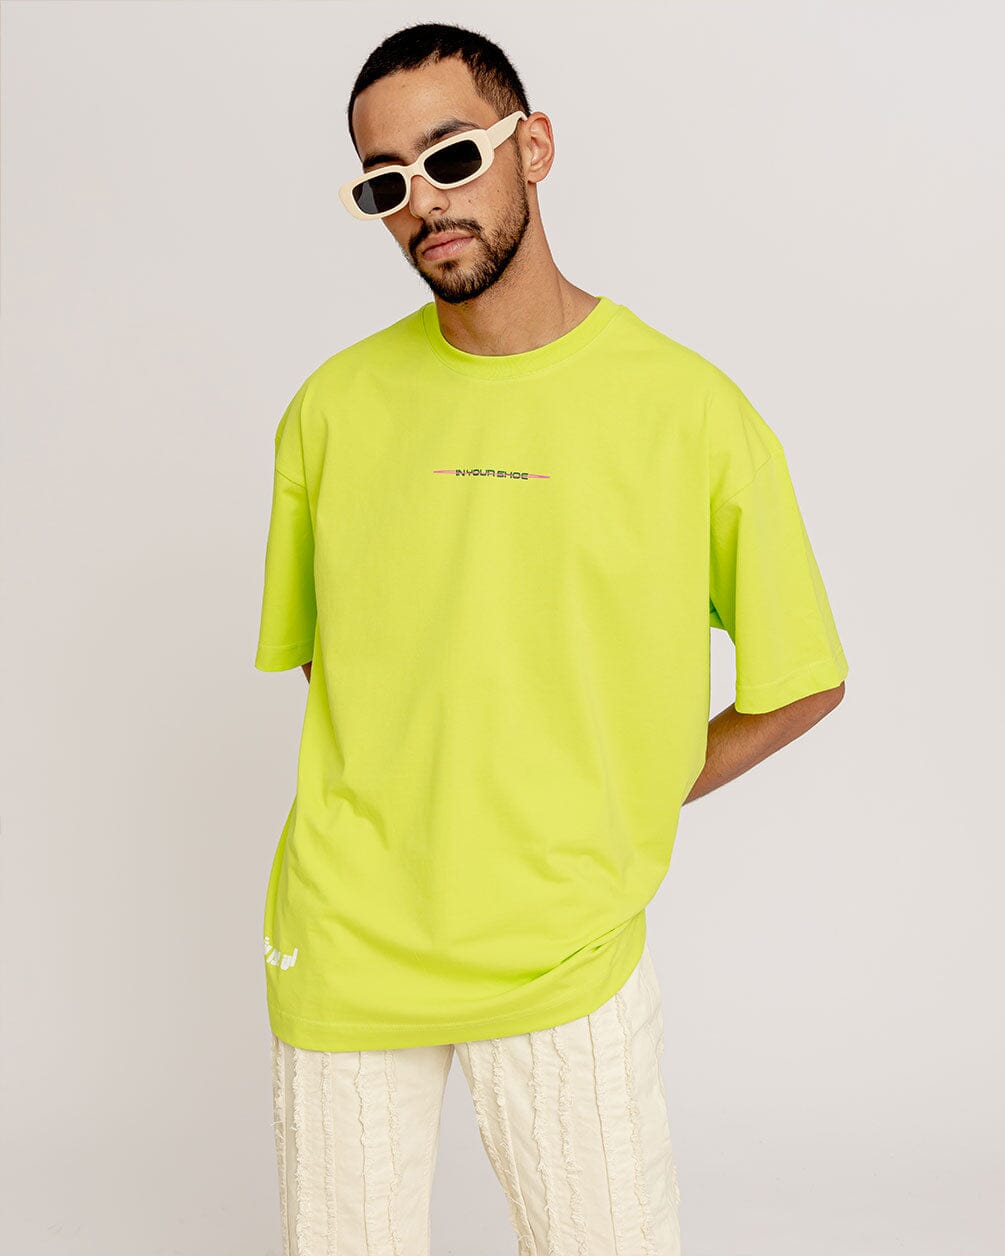 Change Printed Oversized Tee Printed Oversized Tees IN YOUR SHOE 